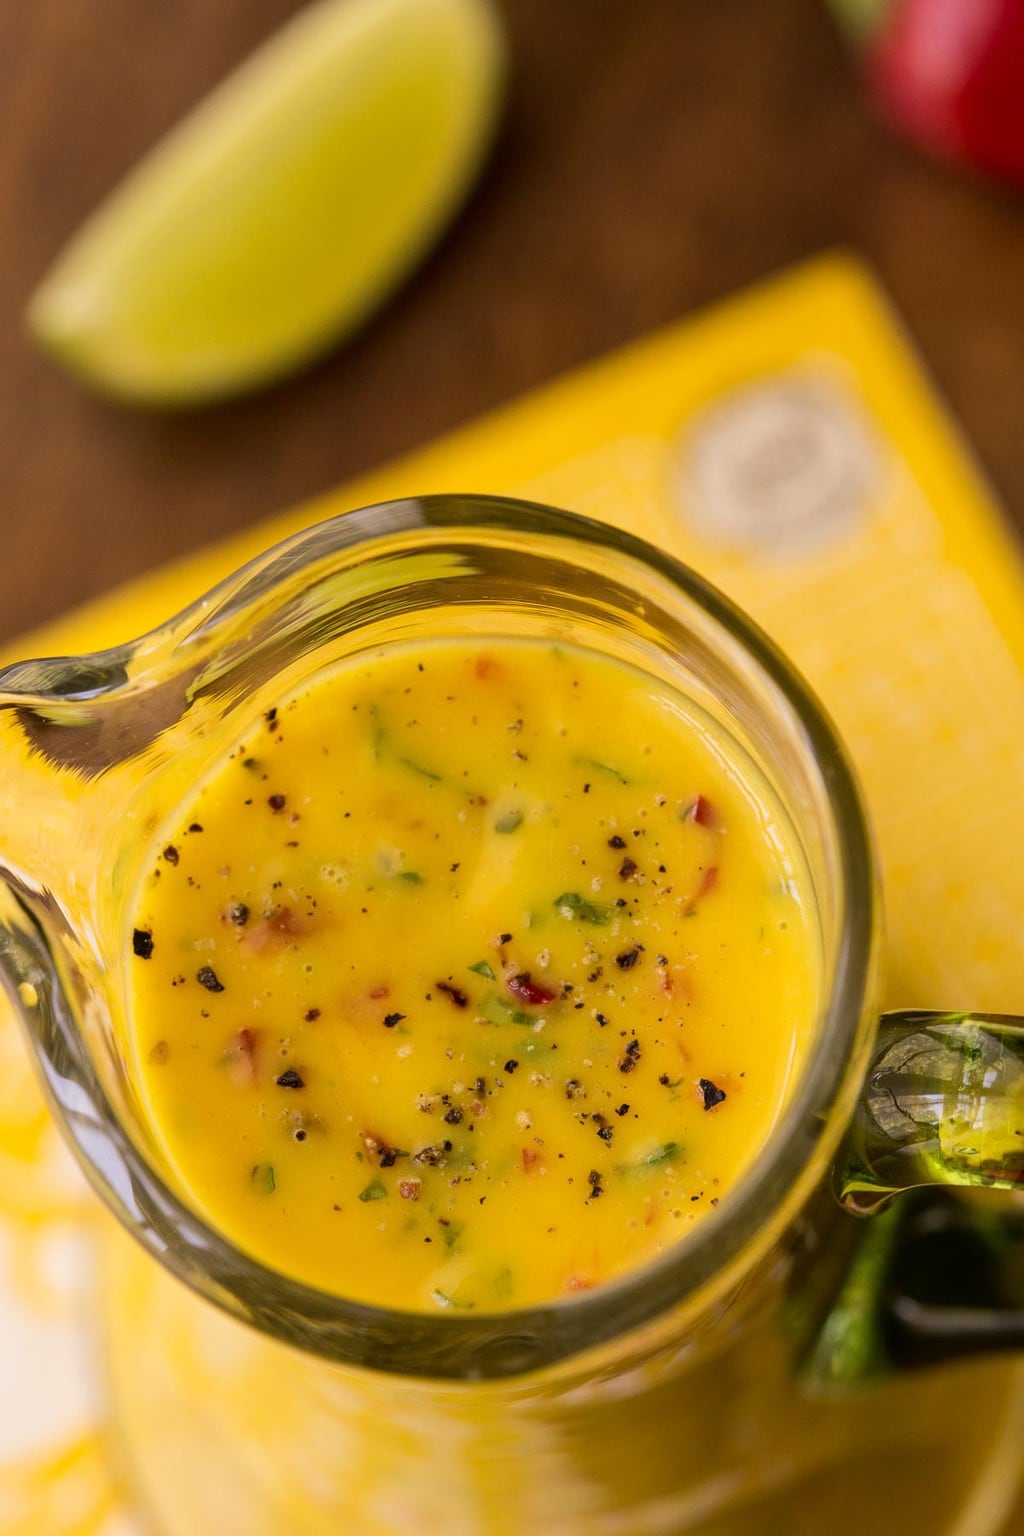 Overhead closeup photo of a glass carafe of Sweet and Spicy Mango Salad Dressing.